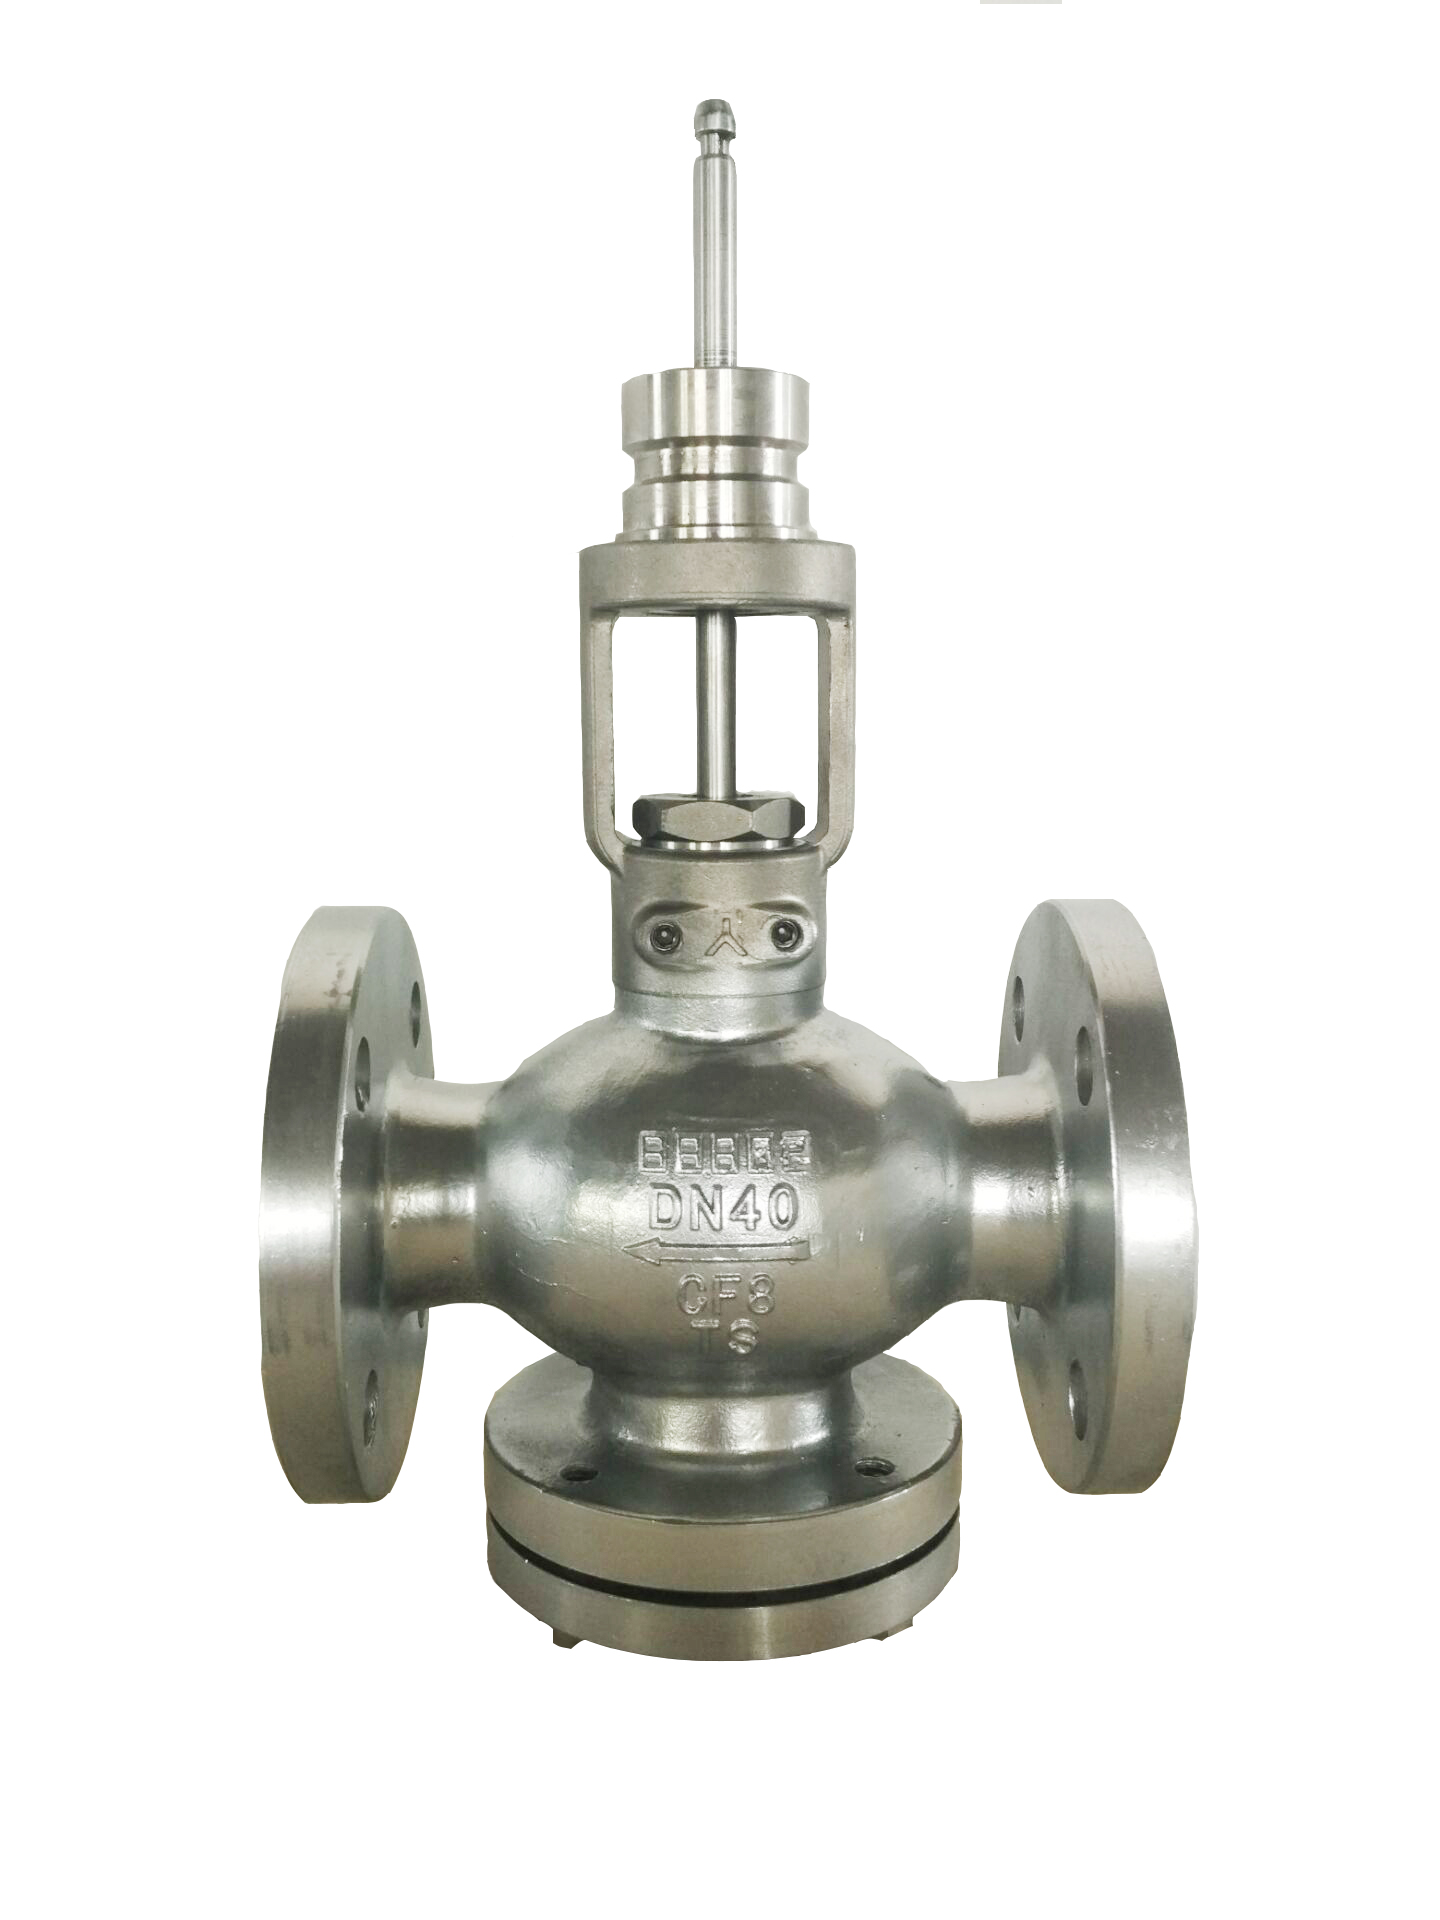 304/316l Stainless Steel Electric Valve Switch Electric Valve Vf61 Series Anti-Corrosion And Acid-Resistant Electric Valve